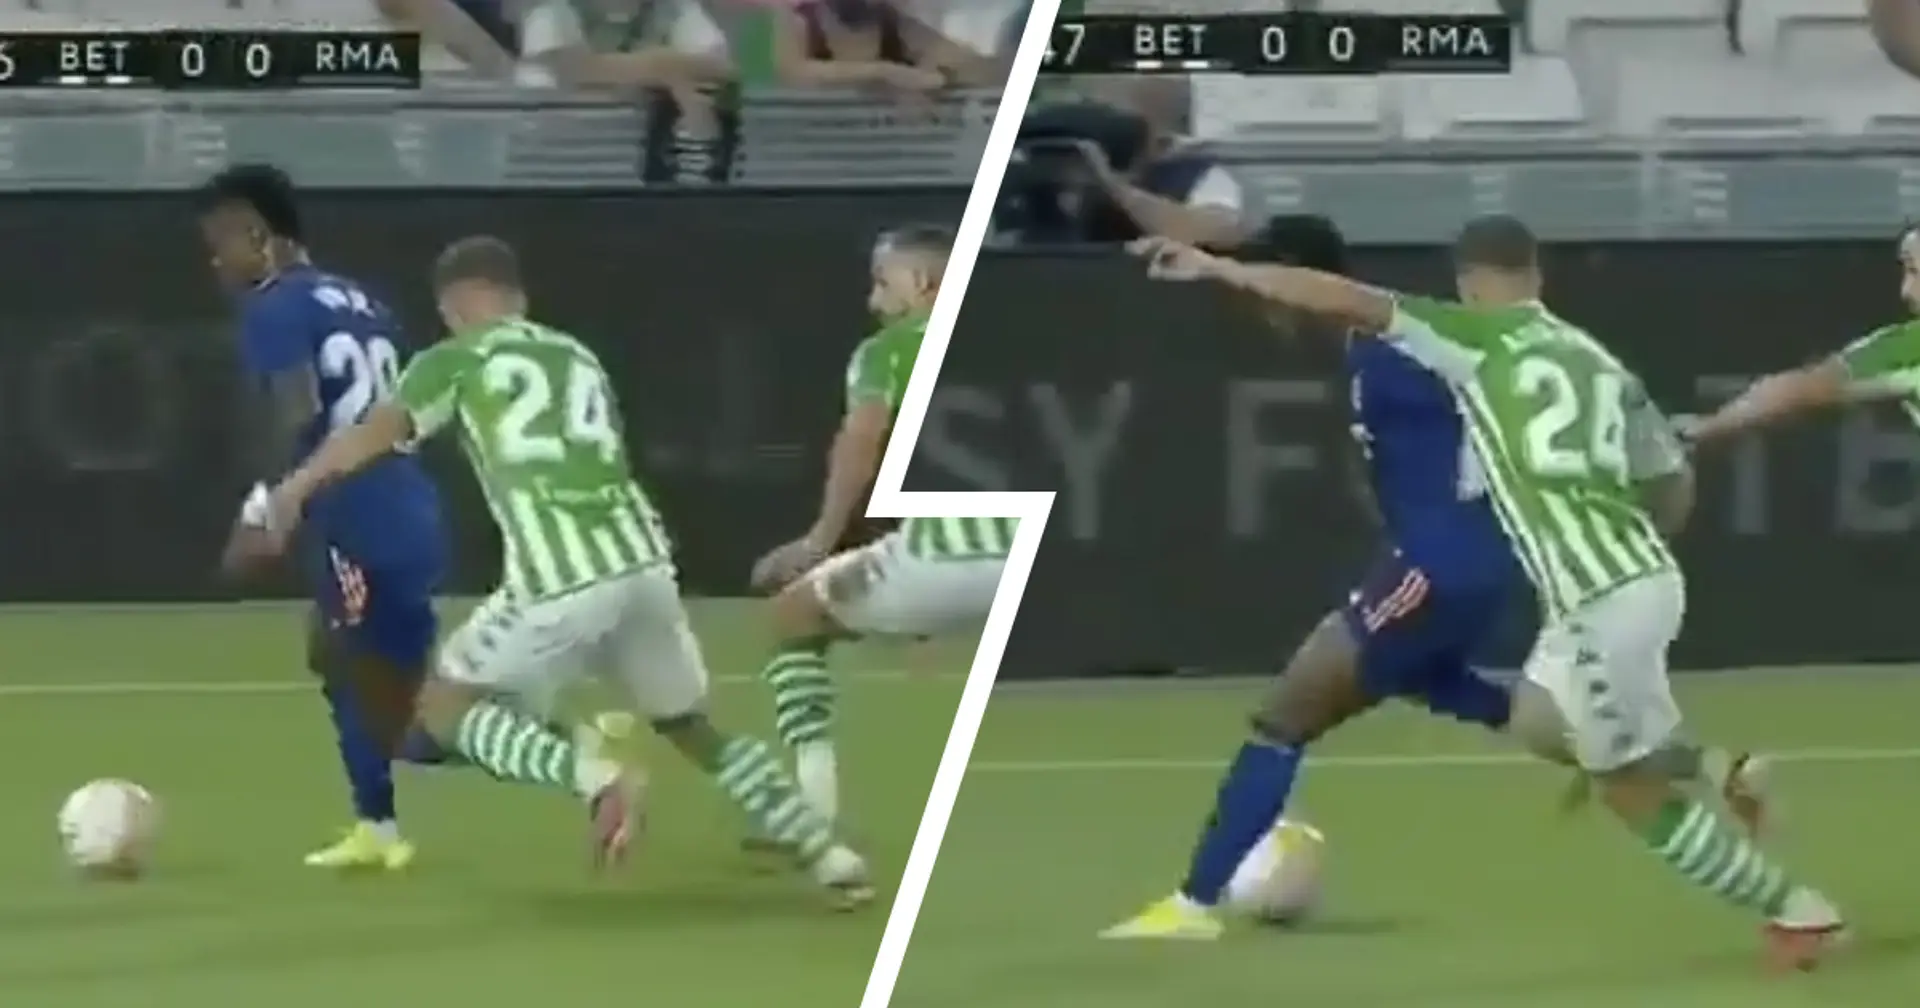 Vinicius destroys 2 Betis players with smooth skill – one of them is ex-Barca defender